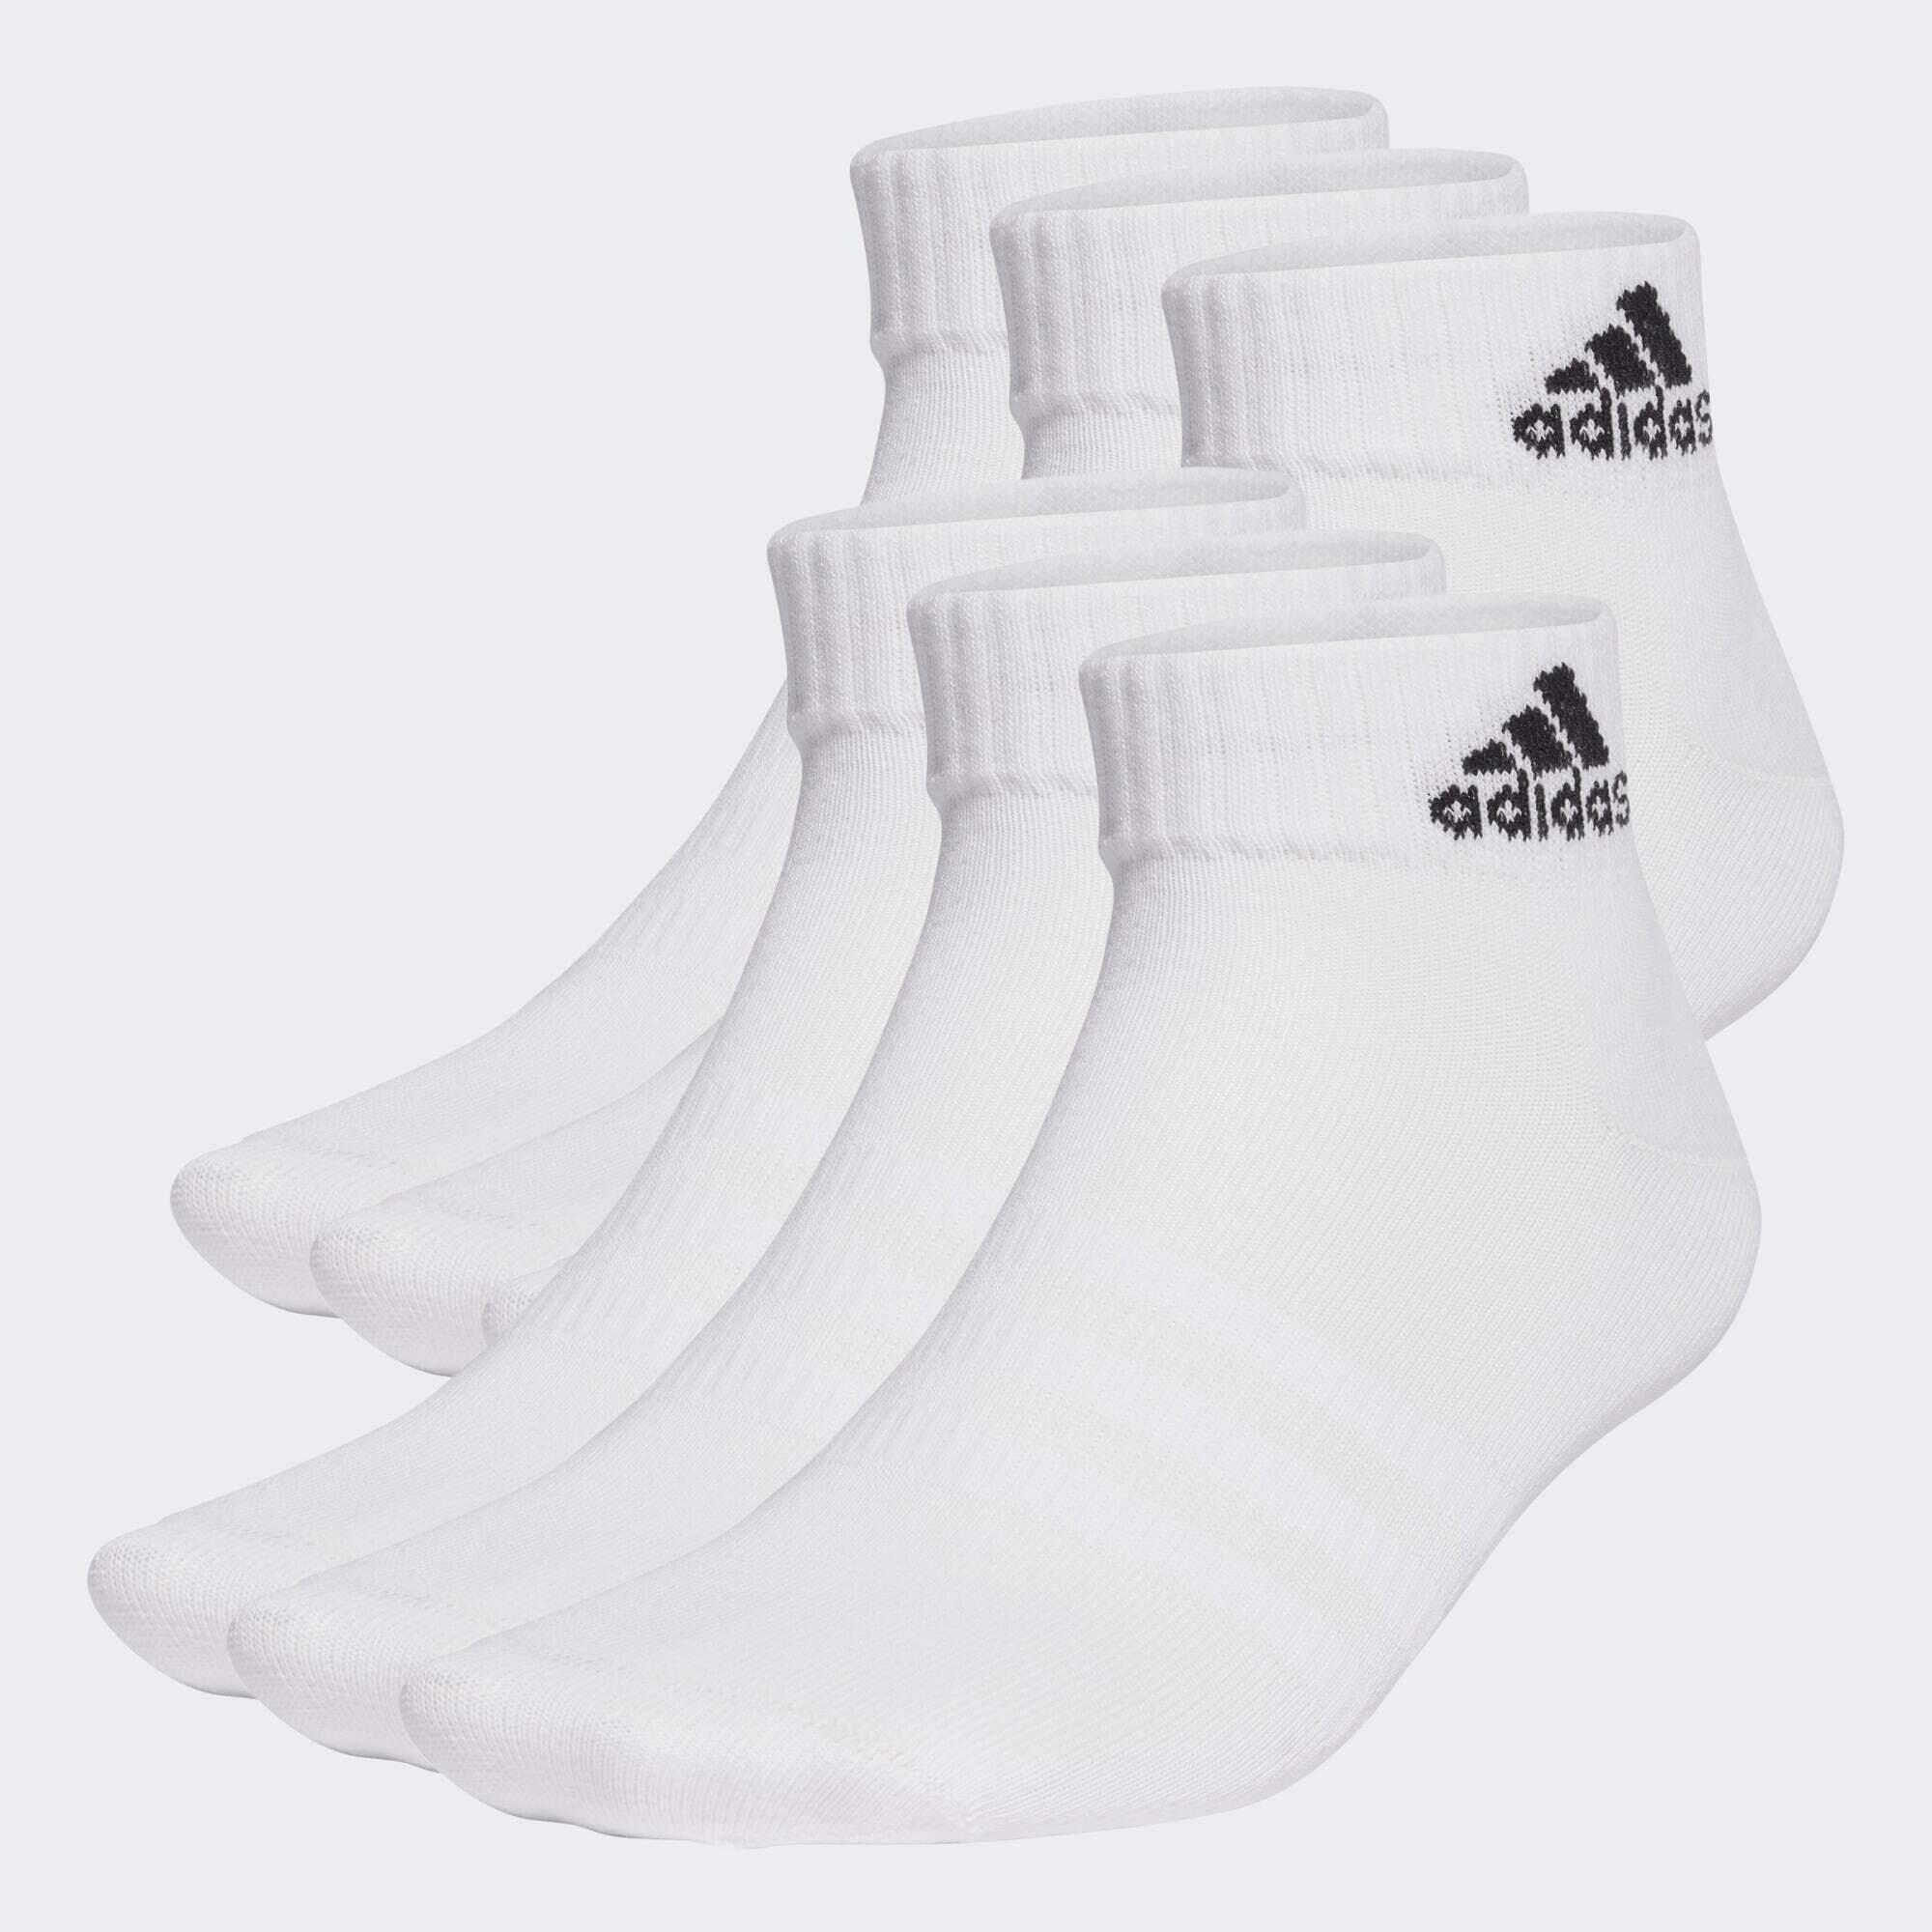 Thin and Light Sportswear Ankle Socks 6 Pairs 2/2